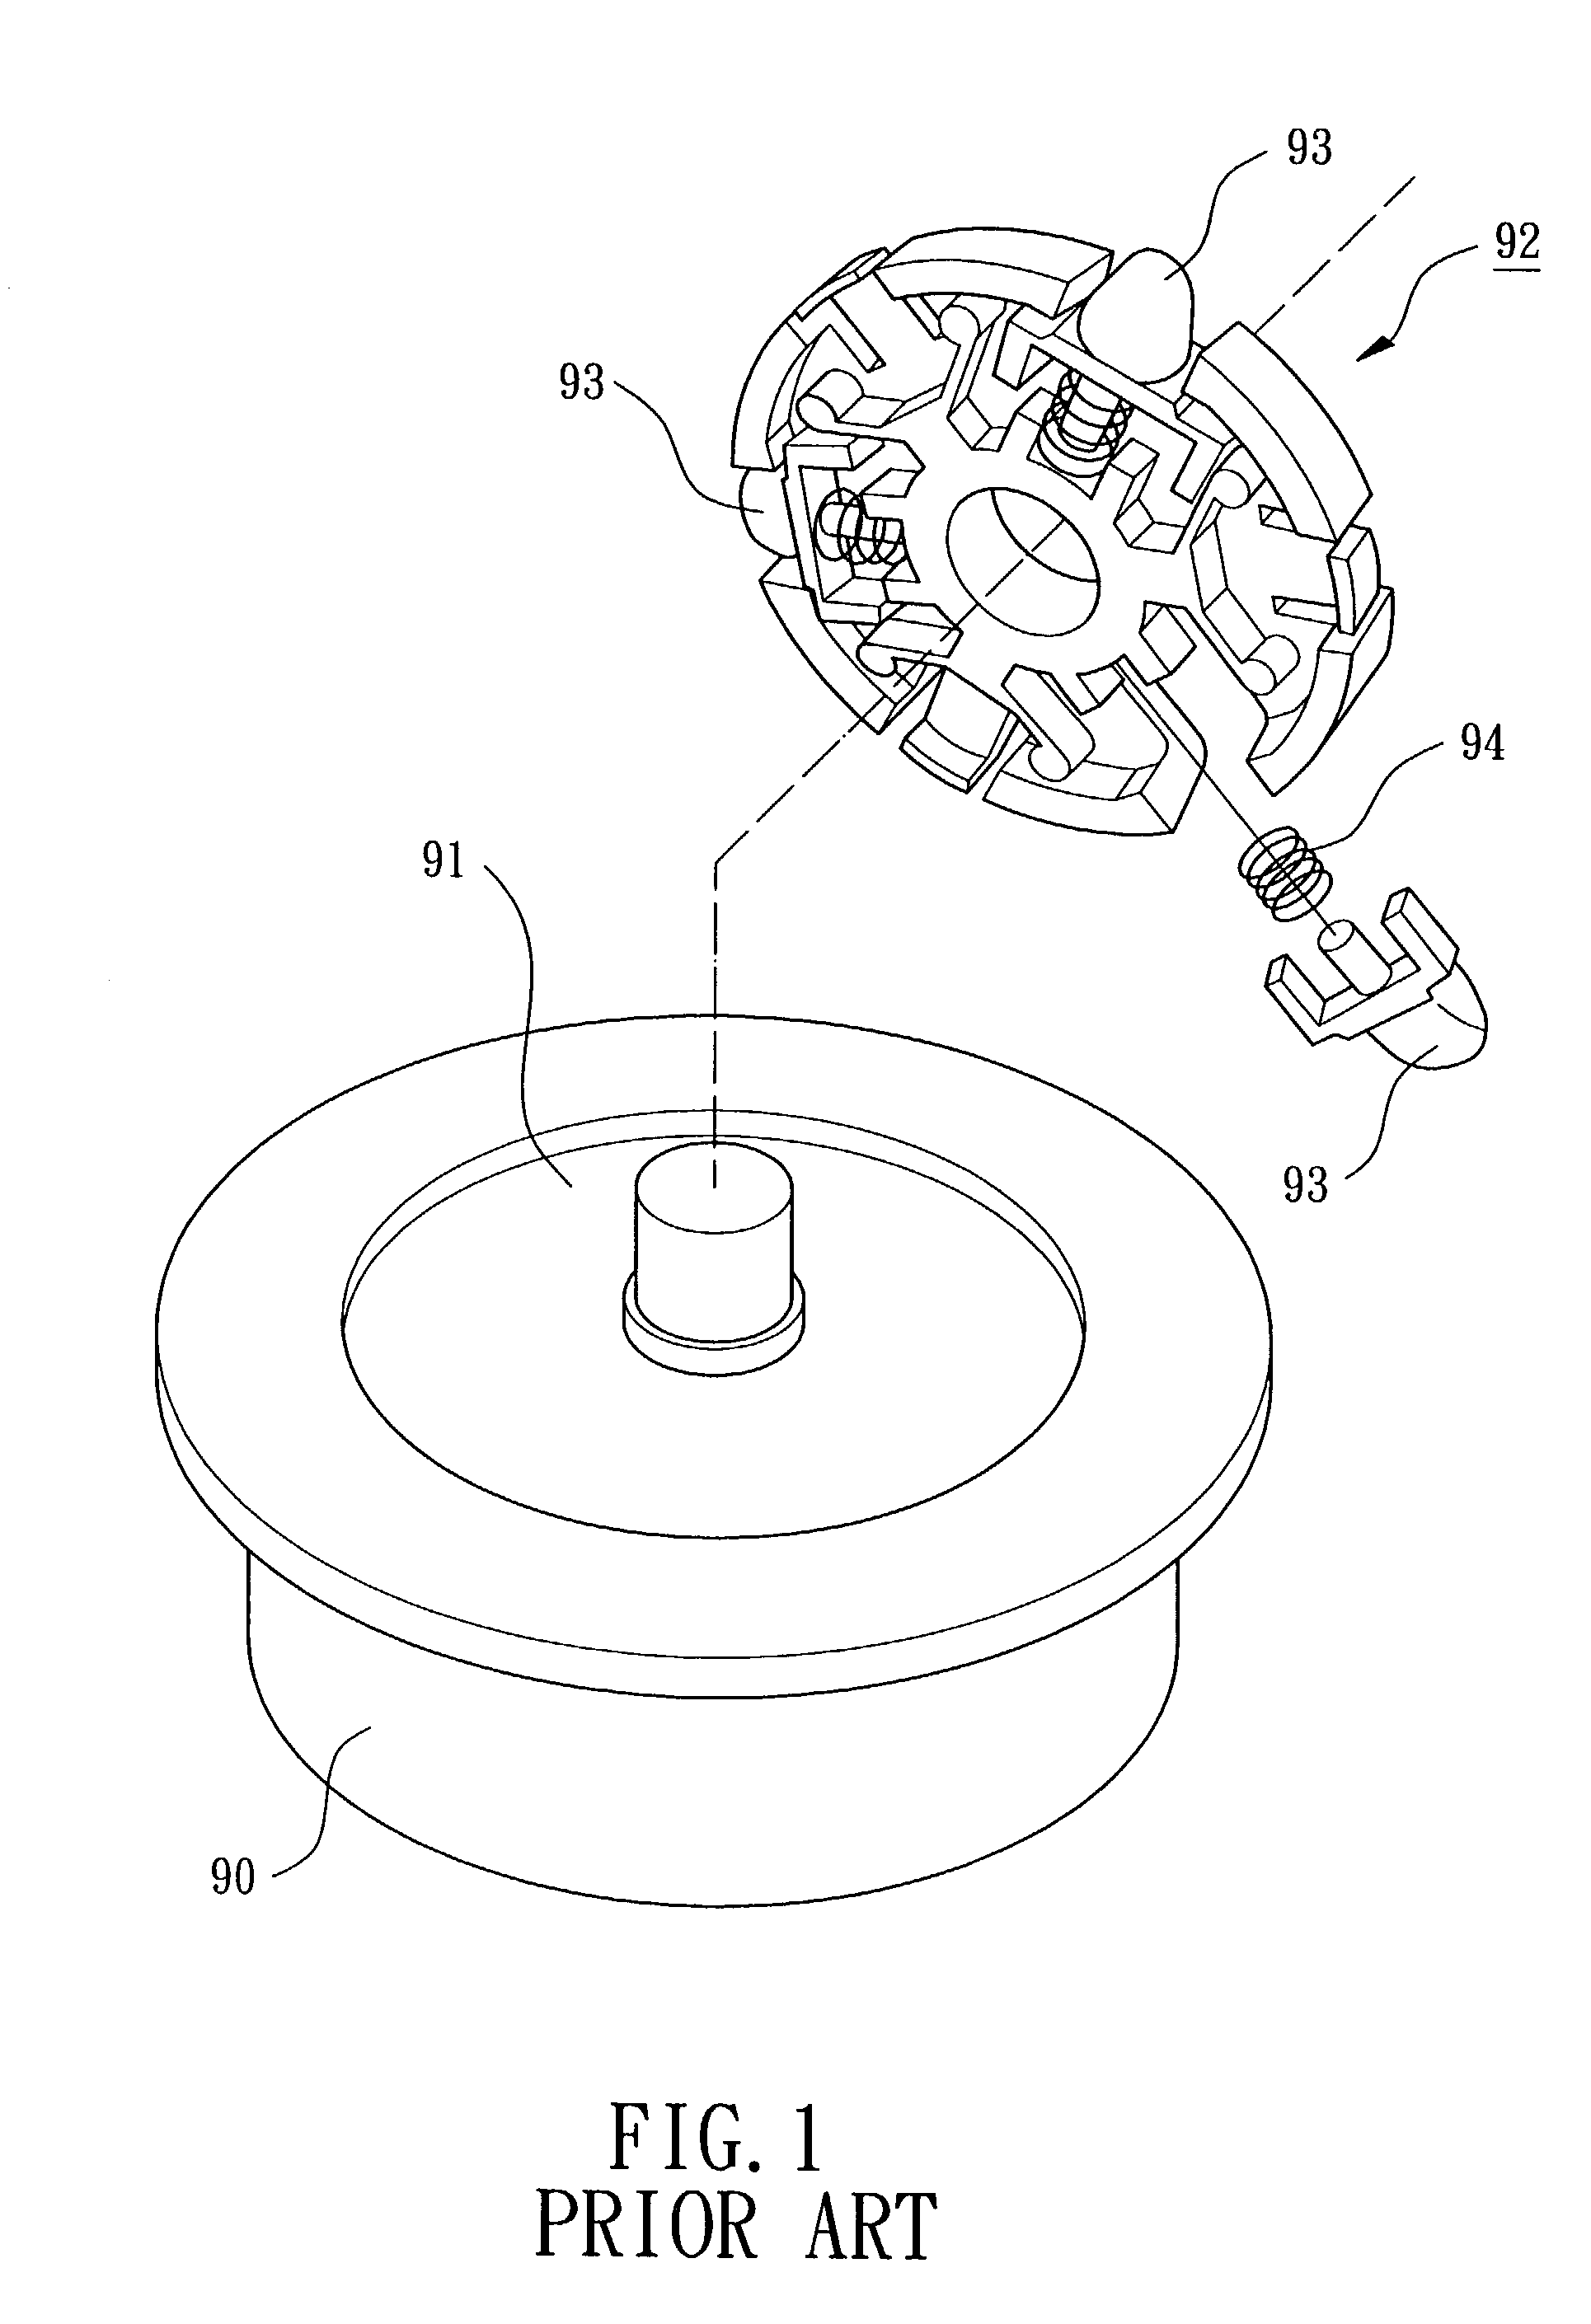 Holding device for an optical disk drive